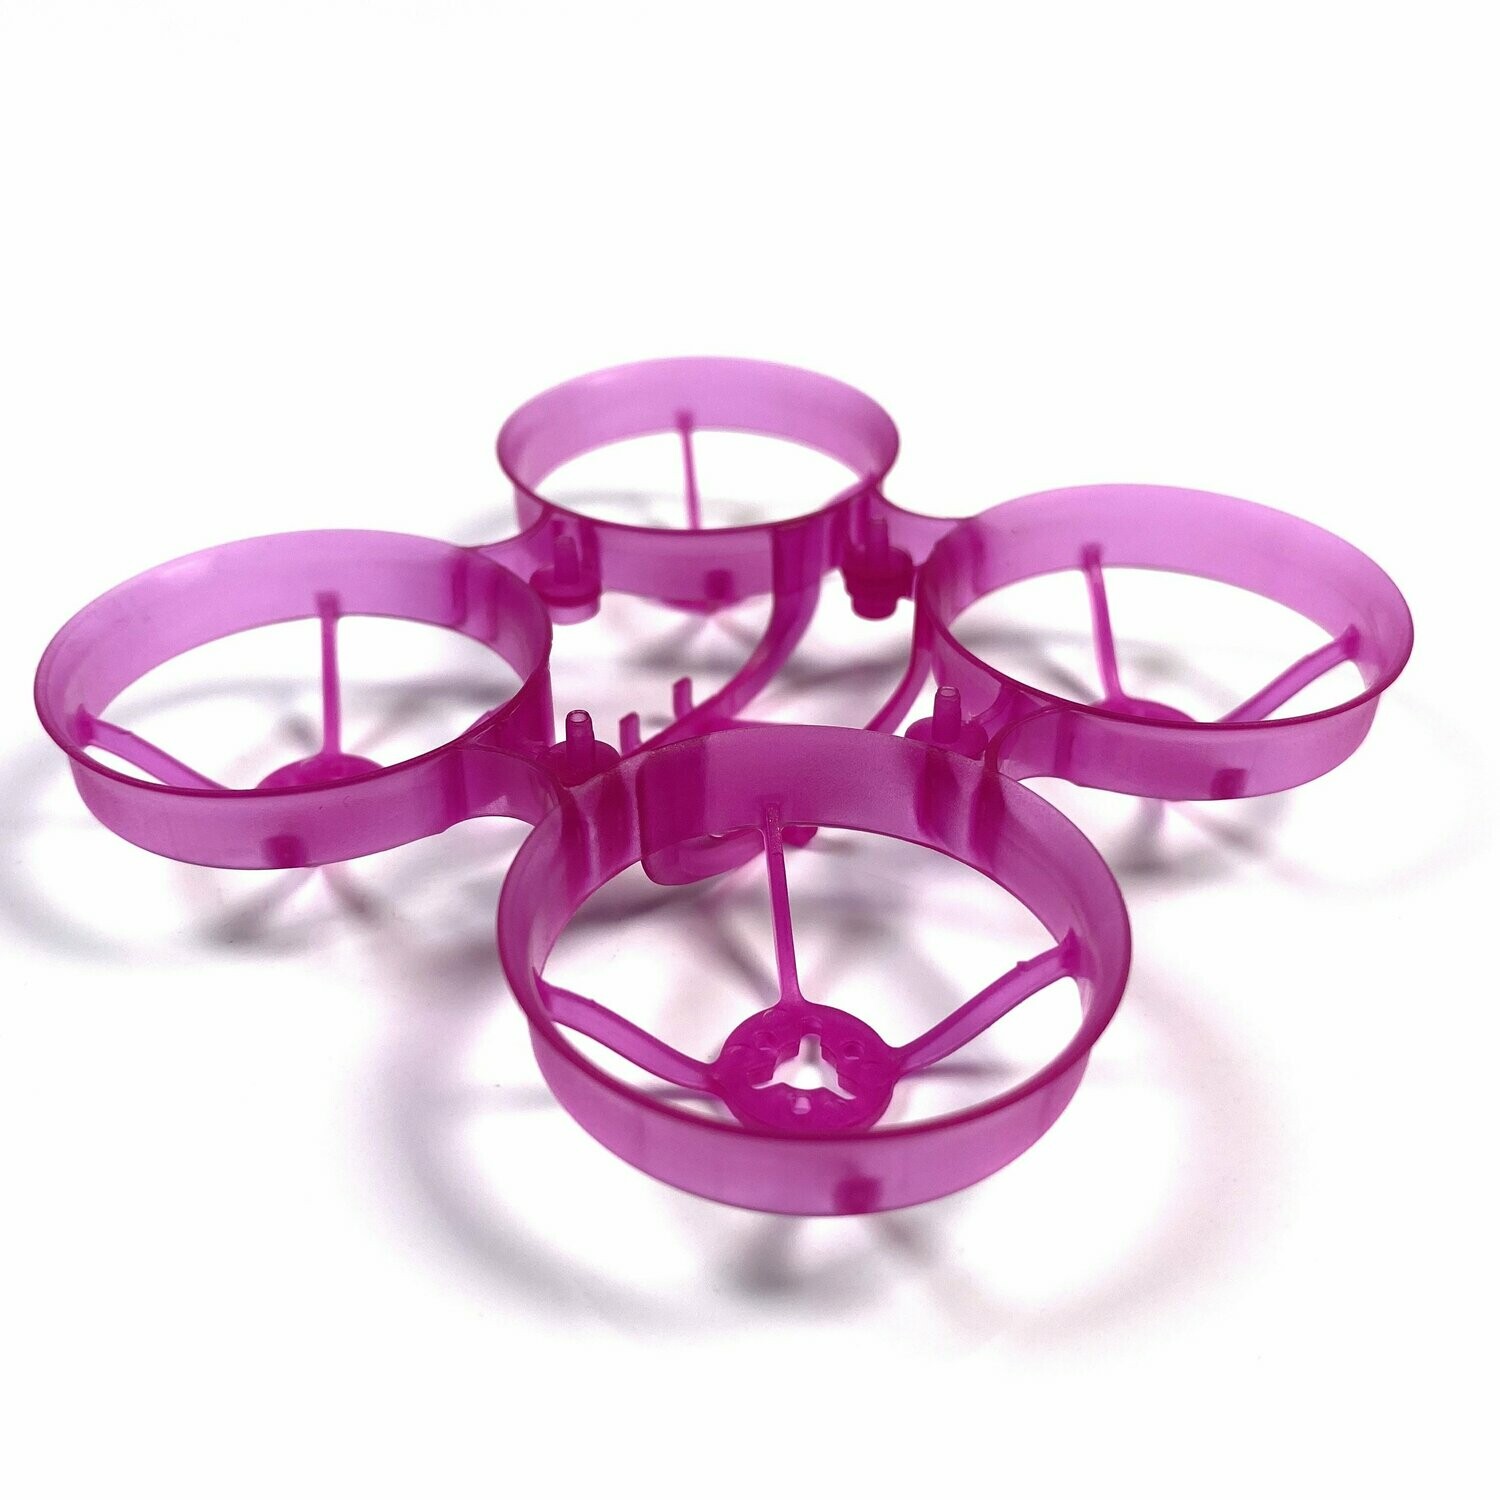 Cockroach Brushless Frame (Pink)